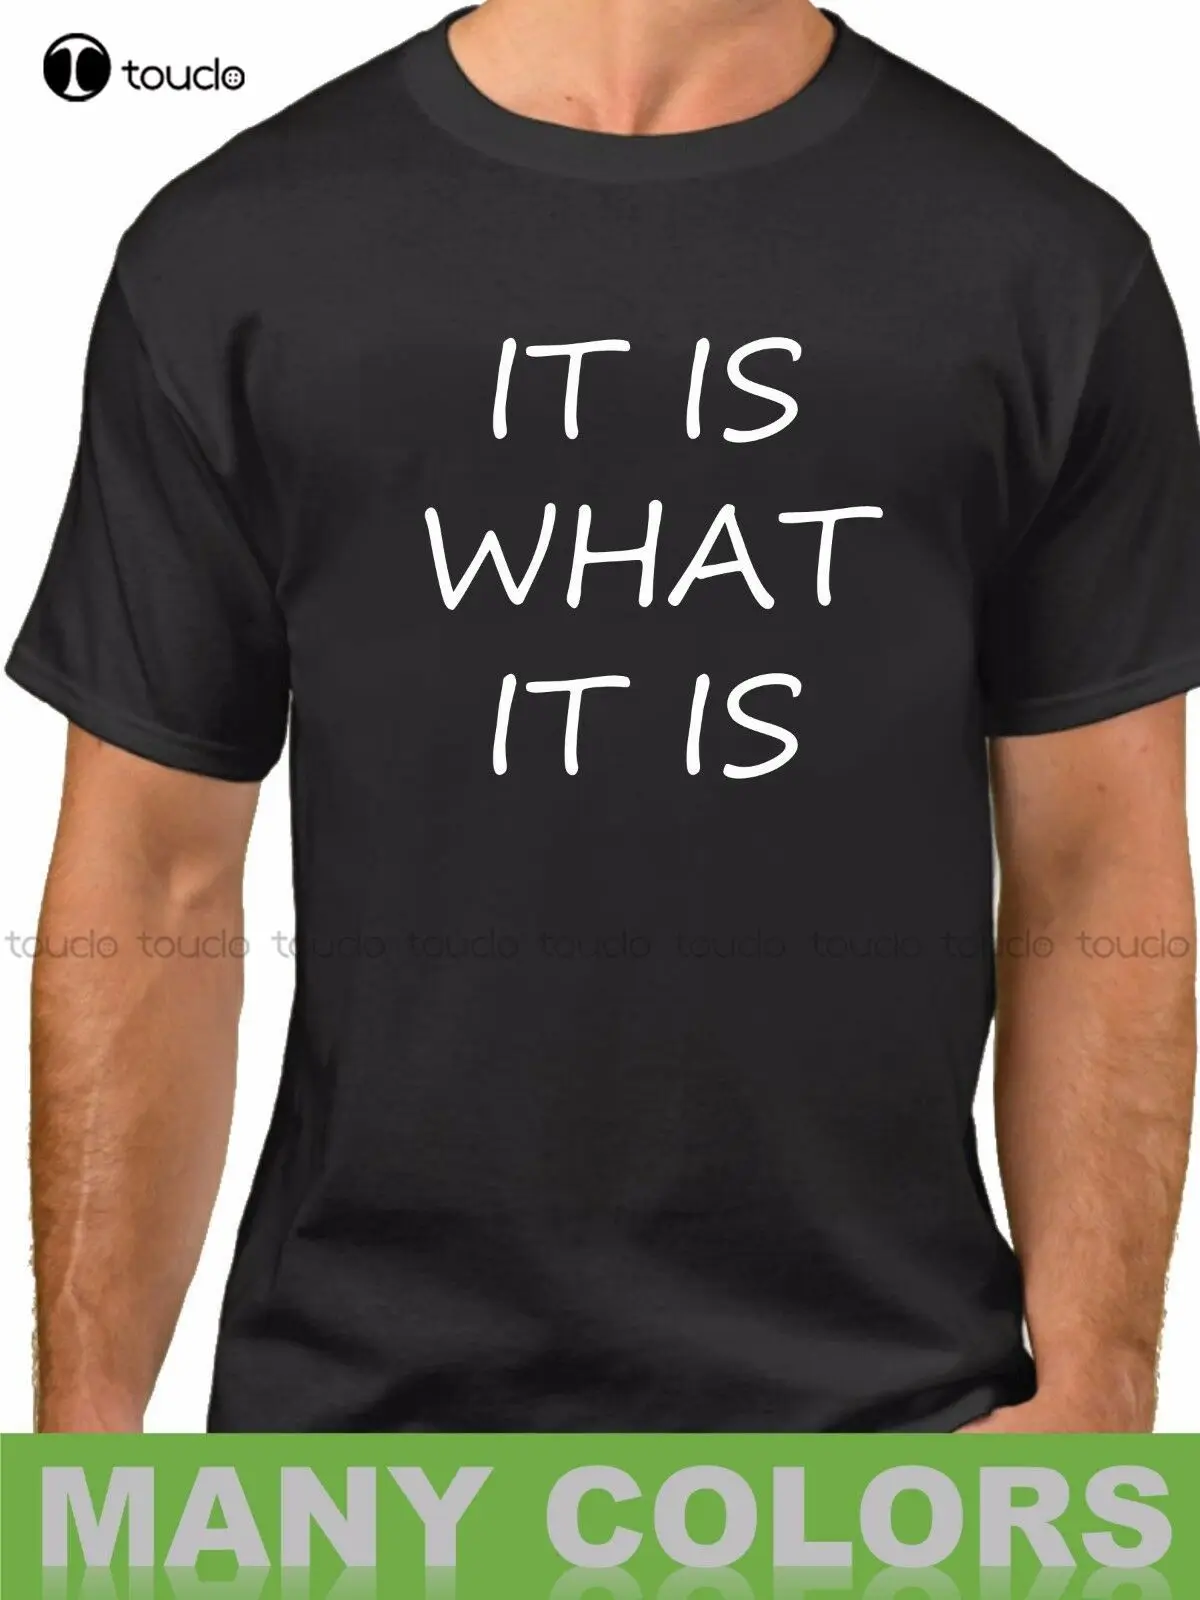 It Is What It Is T-Shirt Cool College Tee Rude Sarcastic Funny Humor Party Shirt Unisex Women Men Tee Shirt